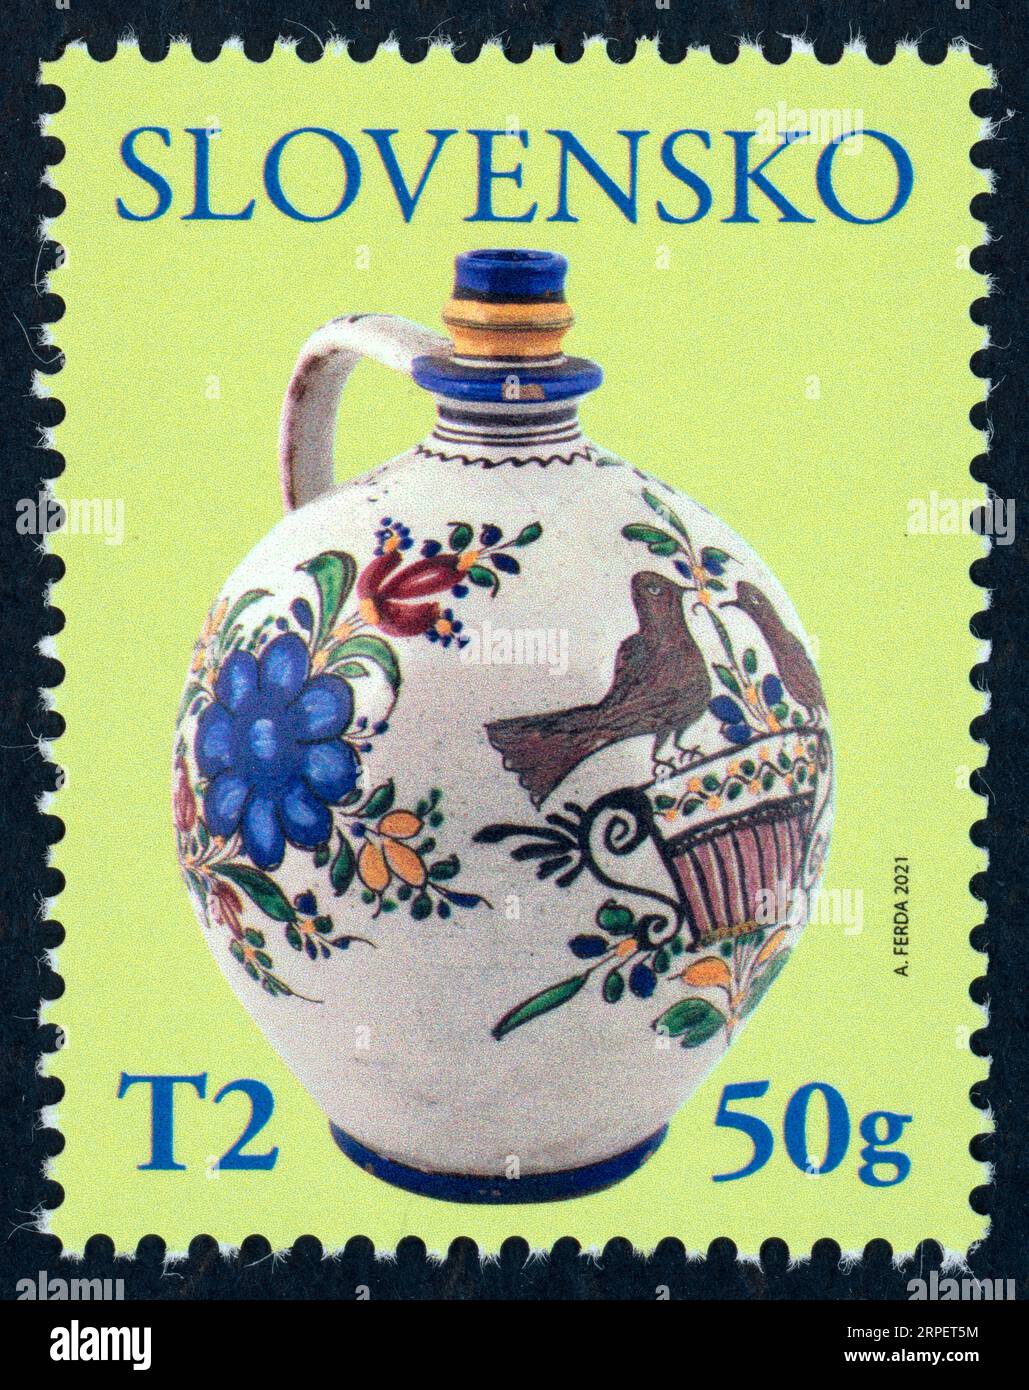 Easter 2021: Folk Faience. Postage stamp issued in Slovakia in 2021. Stock Photo